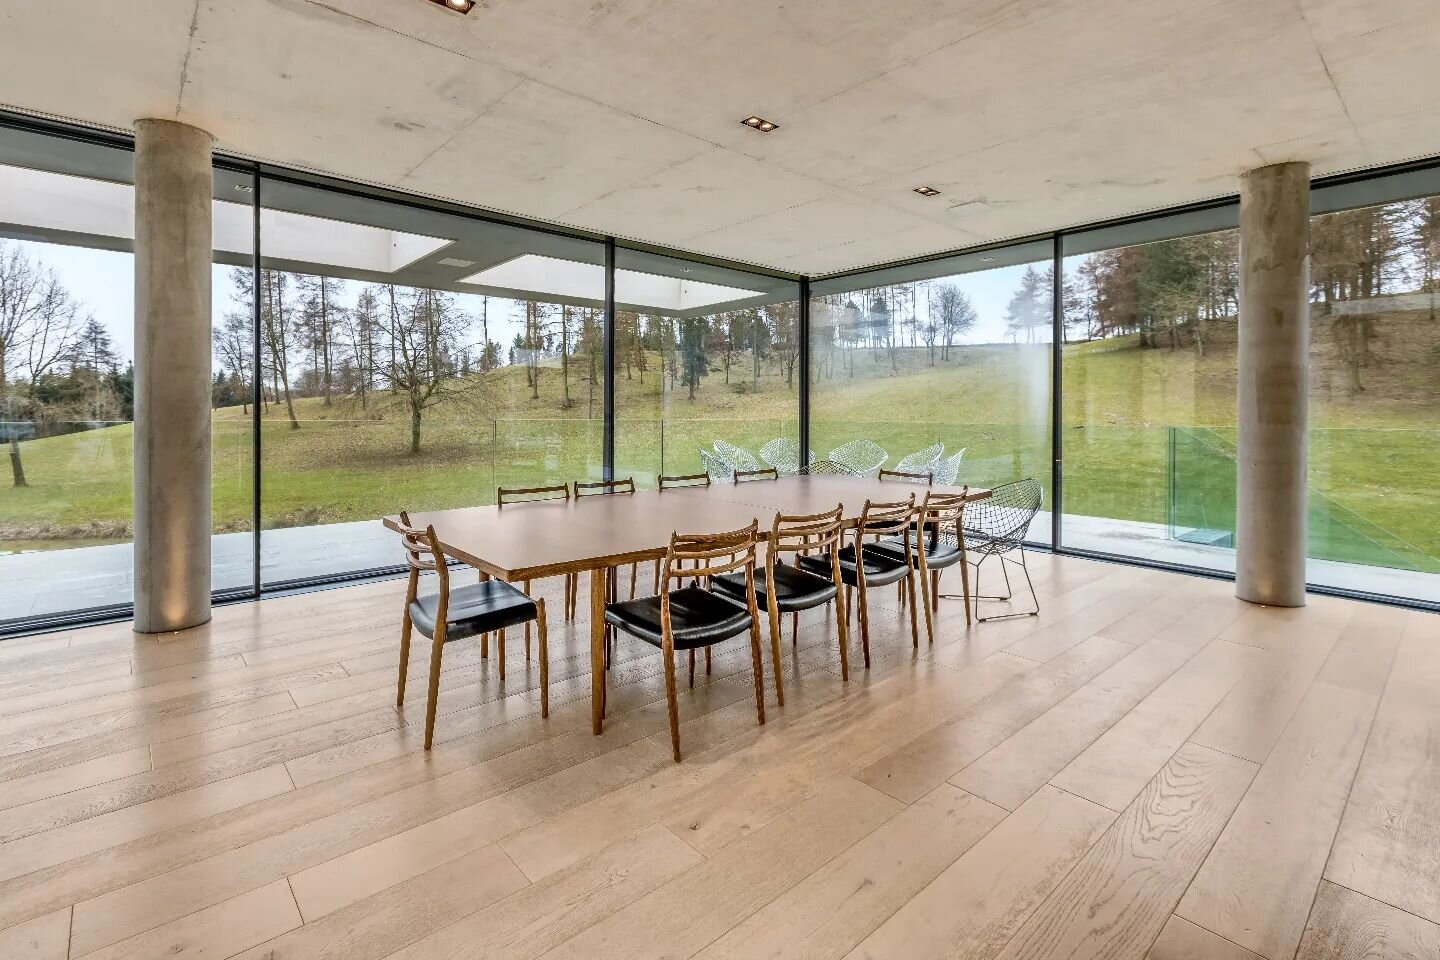 Imagine dining here while looking out across the valley at the deers roaming...

#diningtable #luxurydining #luxuryinteriordesign #luxuryinteriors #interiorarchitecture #modernarchitecture #glazing #countrylife #countryliving